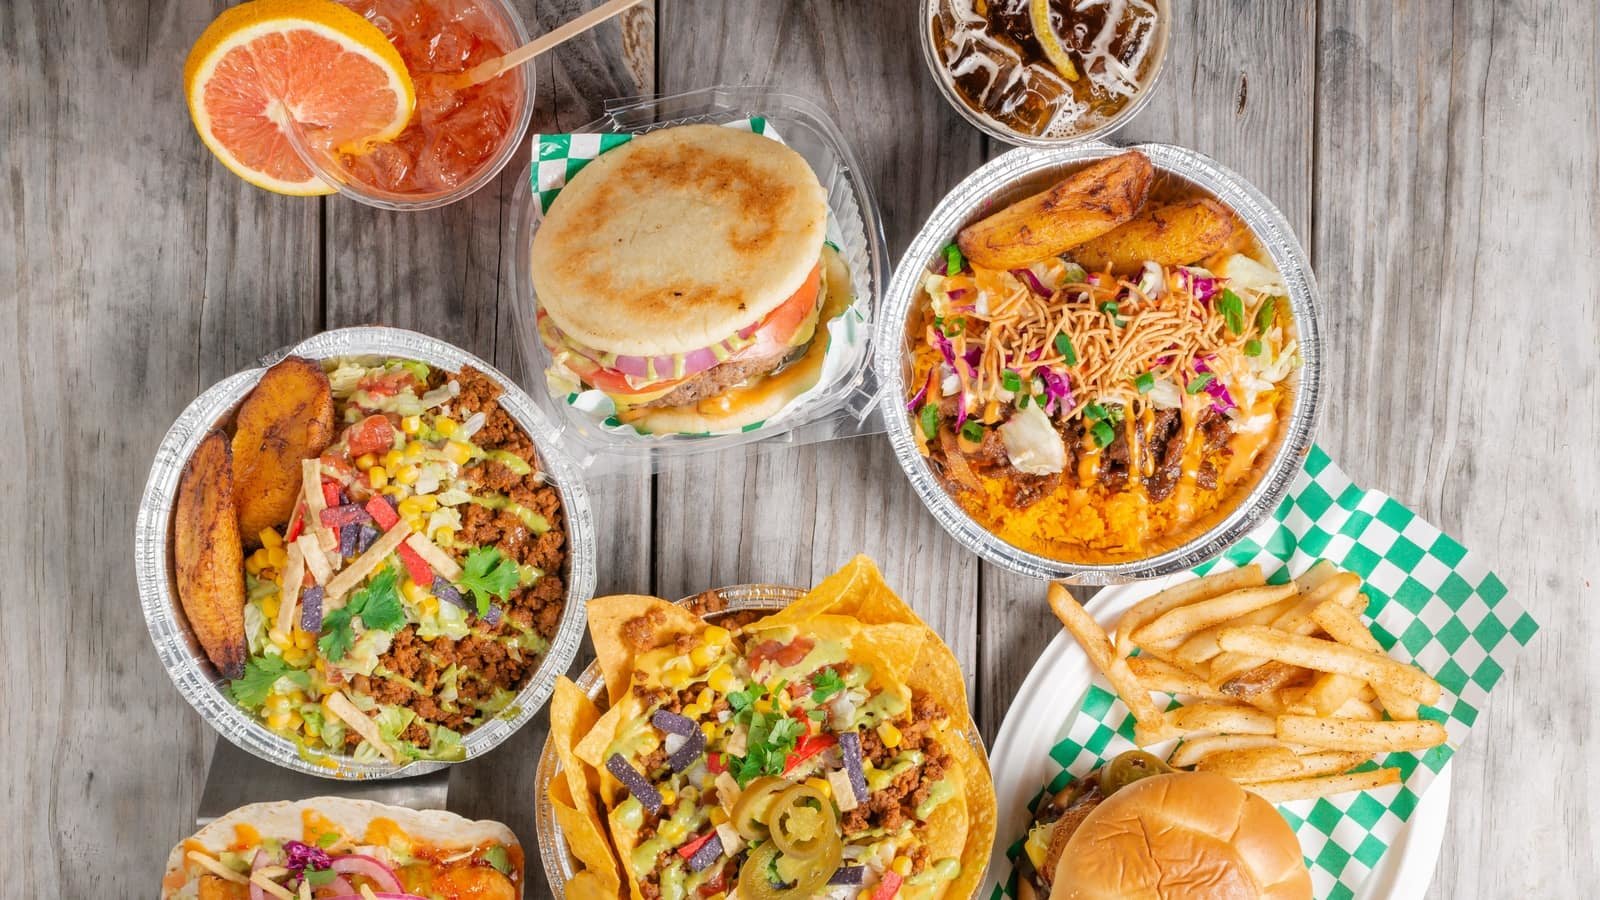 spread of food including burgers, bowls, and nachos